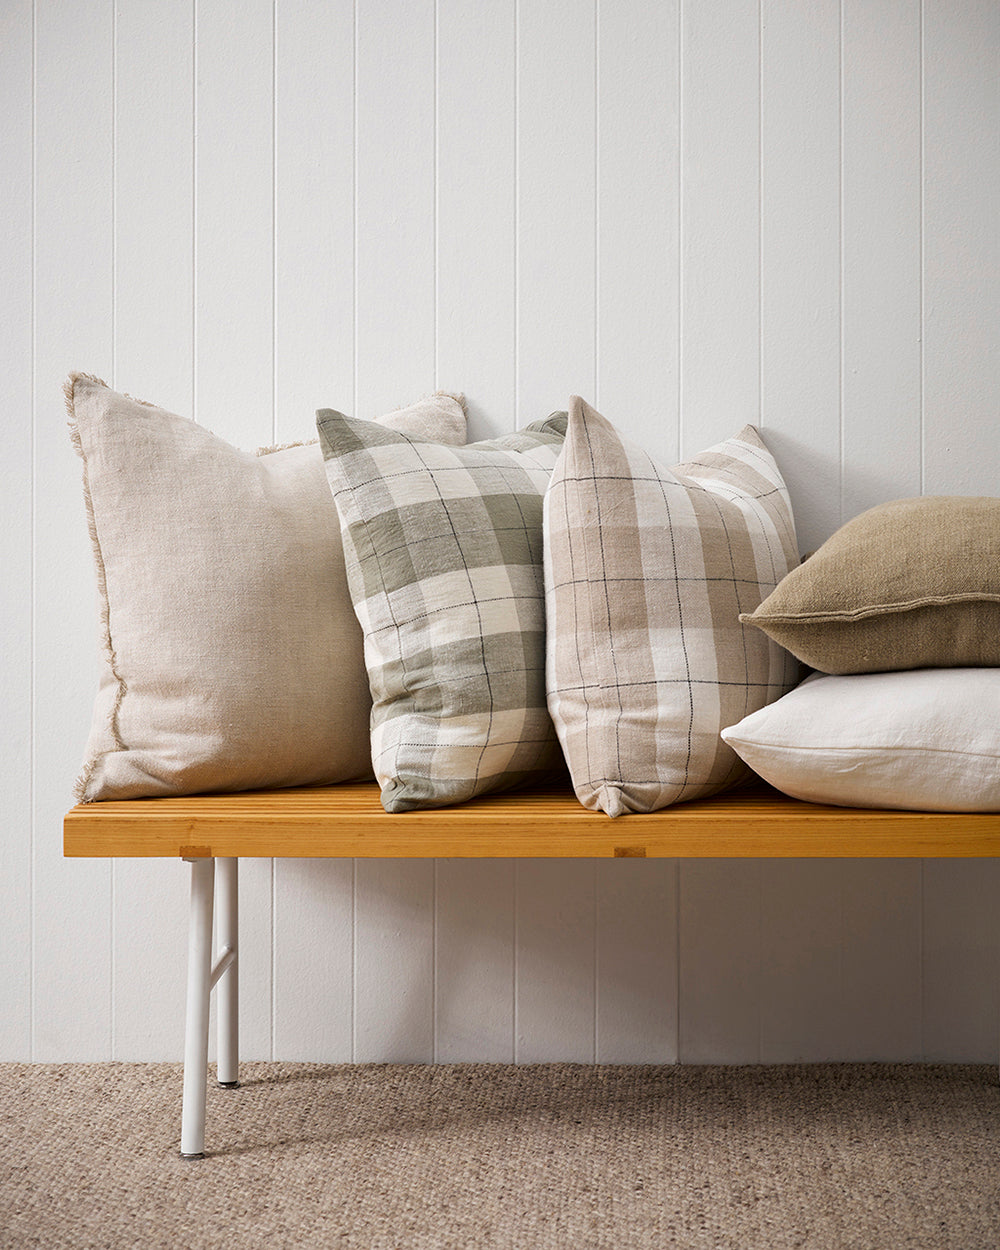 Keaton Linen cushion in cream on bench with Dante checked cushion